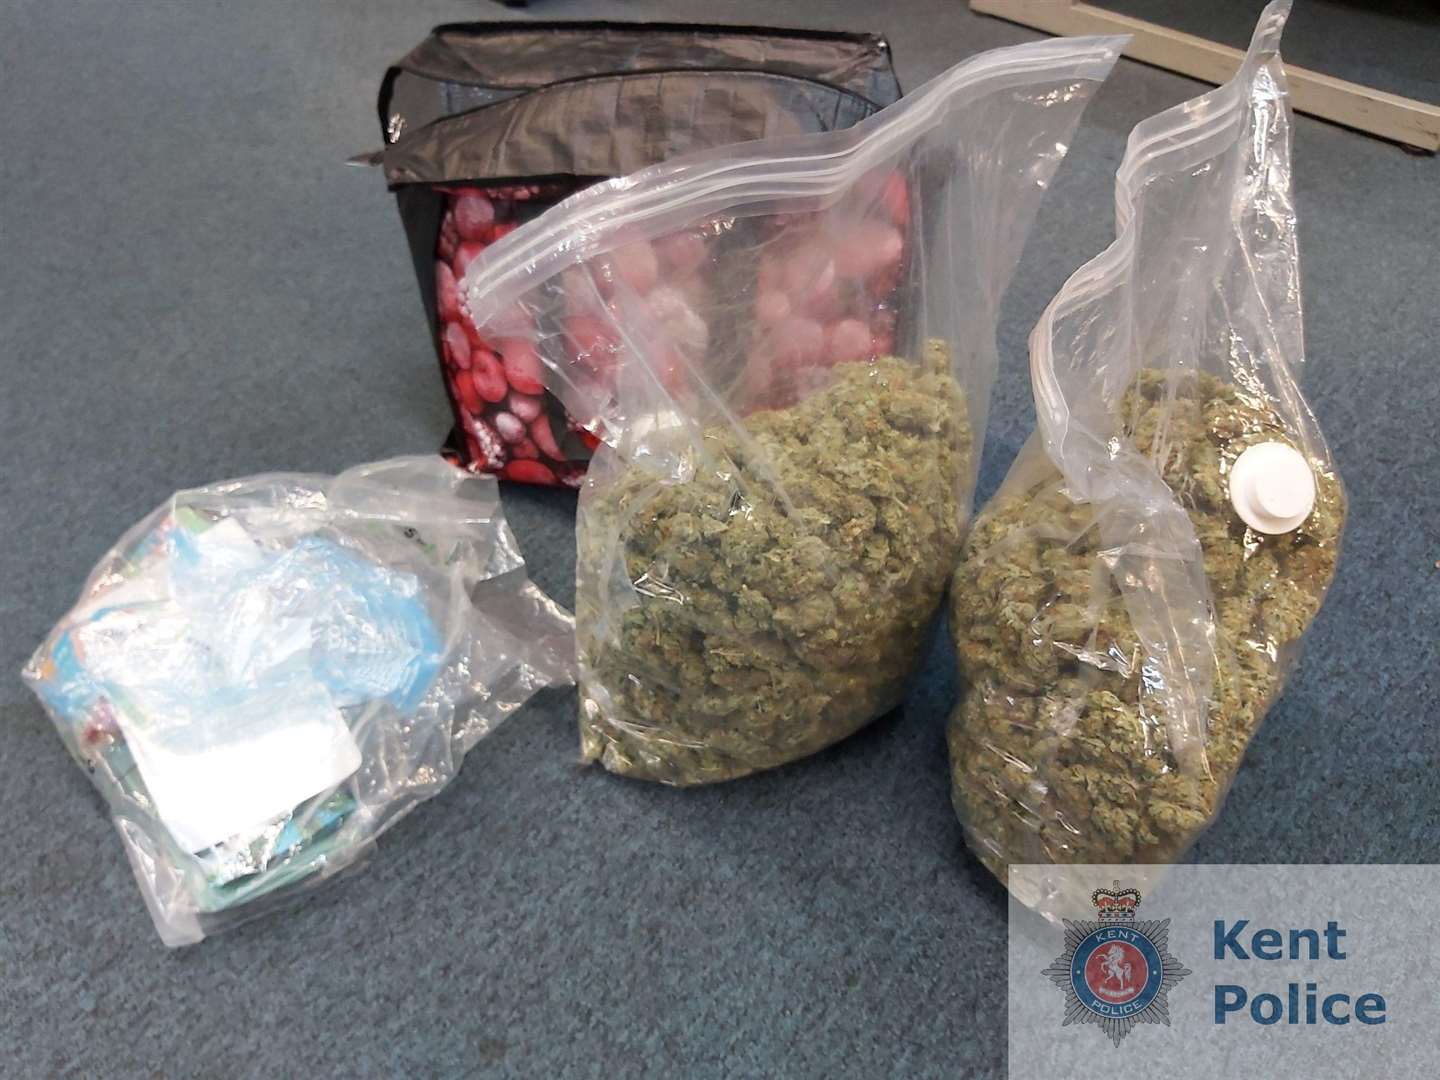 Around two kilos of cannabis were seized during a home search in Ashford. Picture: Kent Police